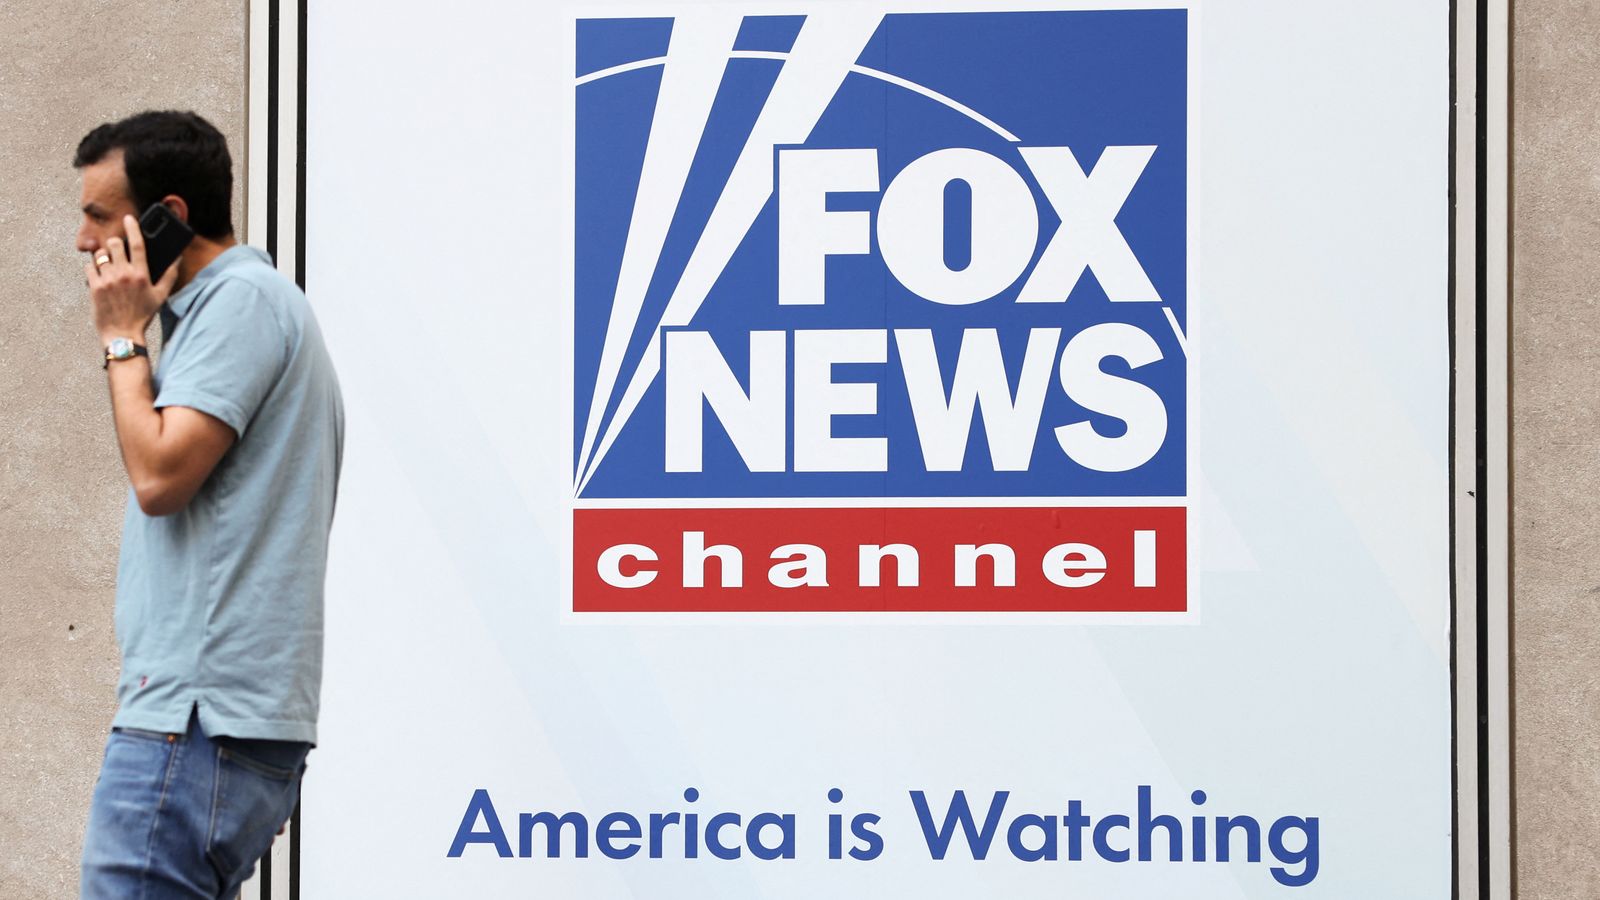 Dominion agrees 7.5m settlement in defamation lawsuit with Fox News over vote-rigging claims